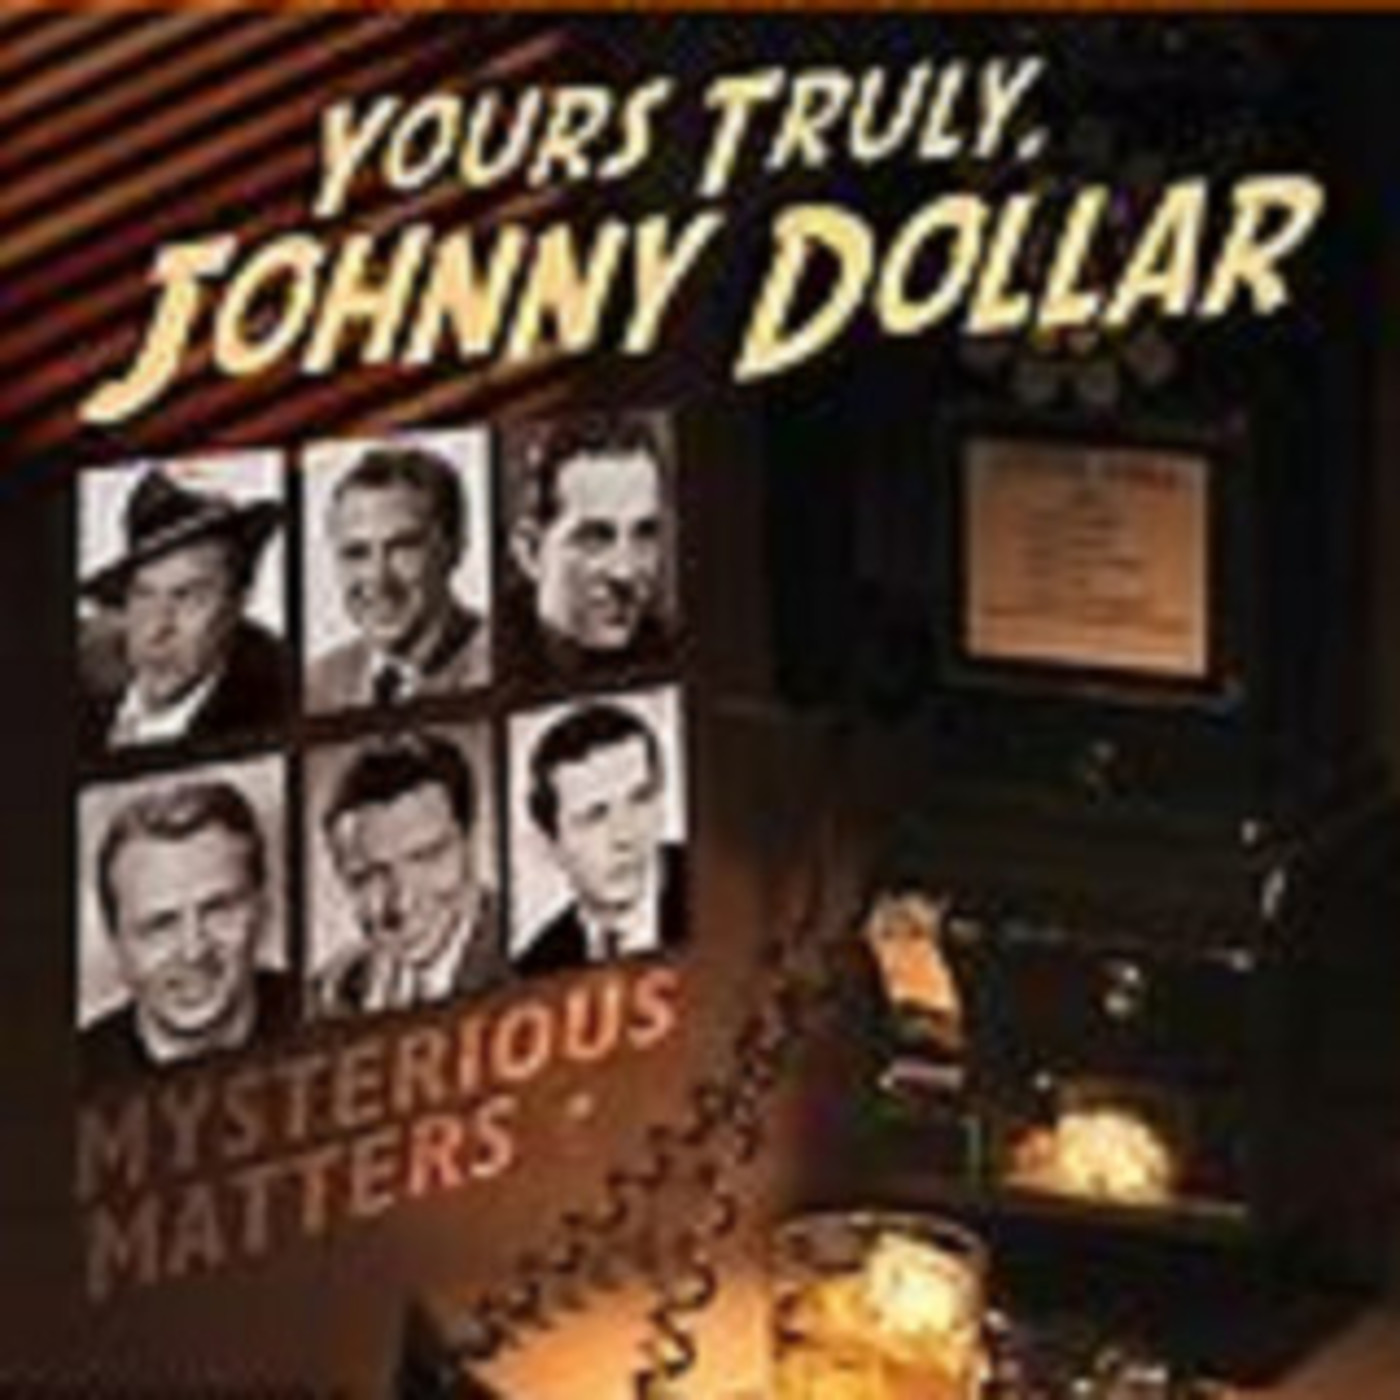 Yours Truly, Johnny Dollar - 010762, episode 773 - The Hot Chocolate Matter